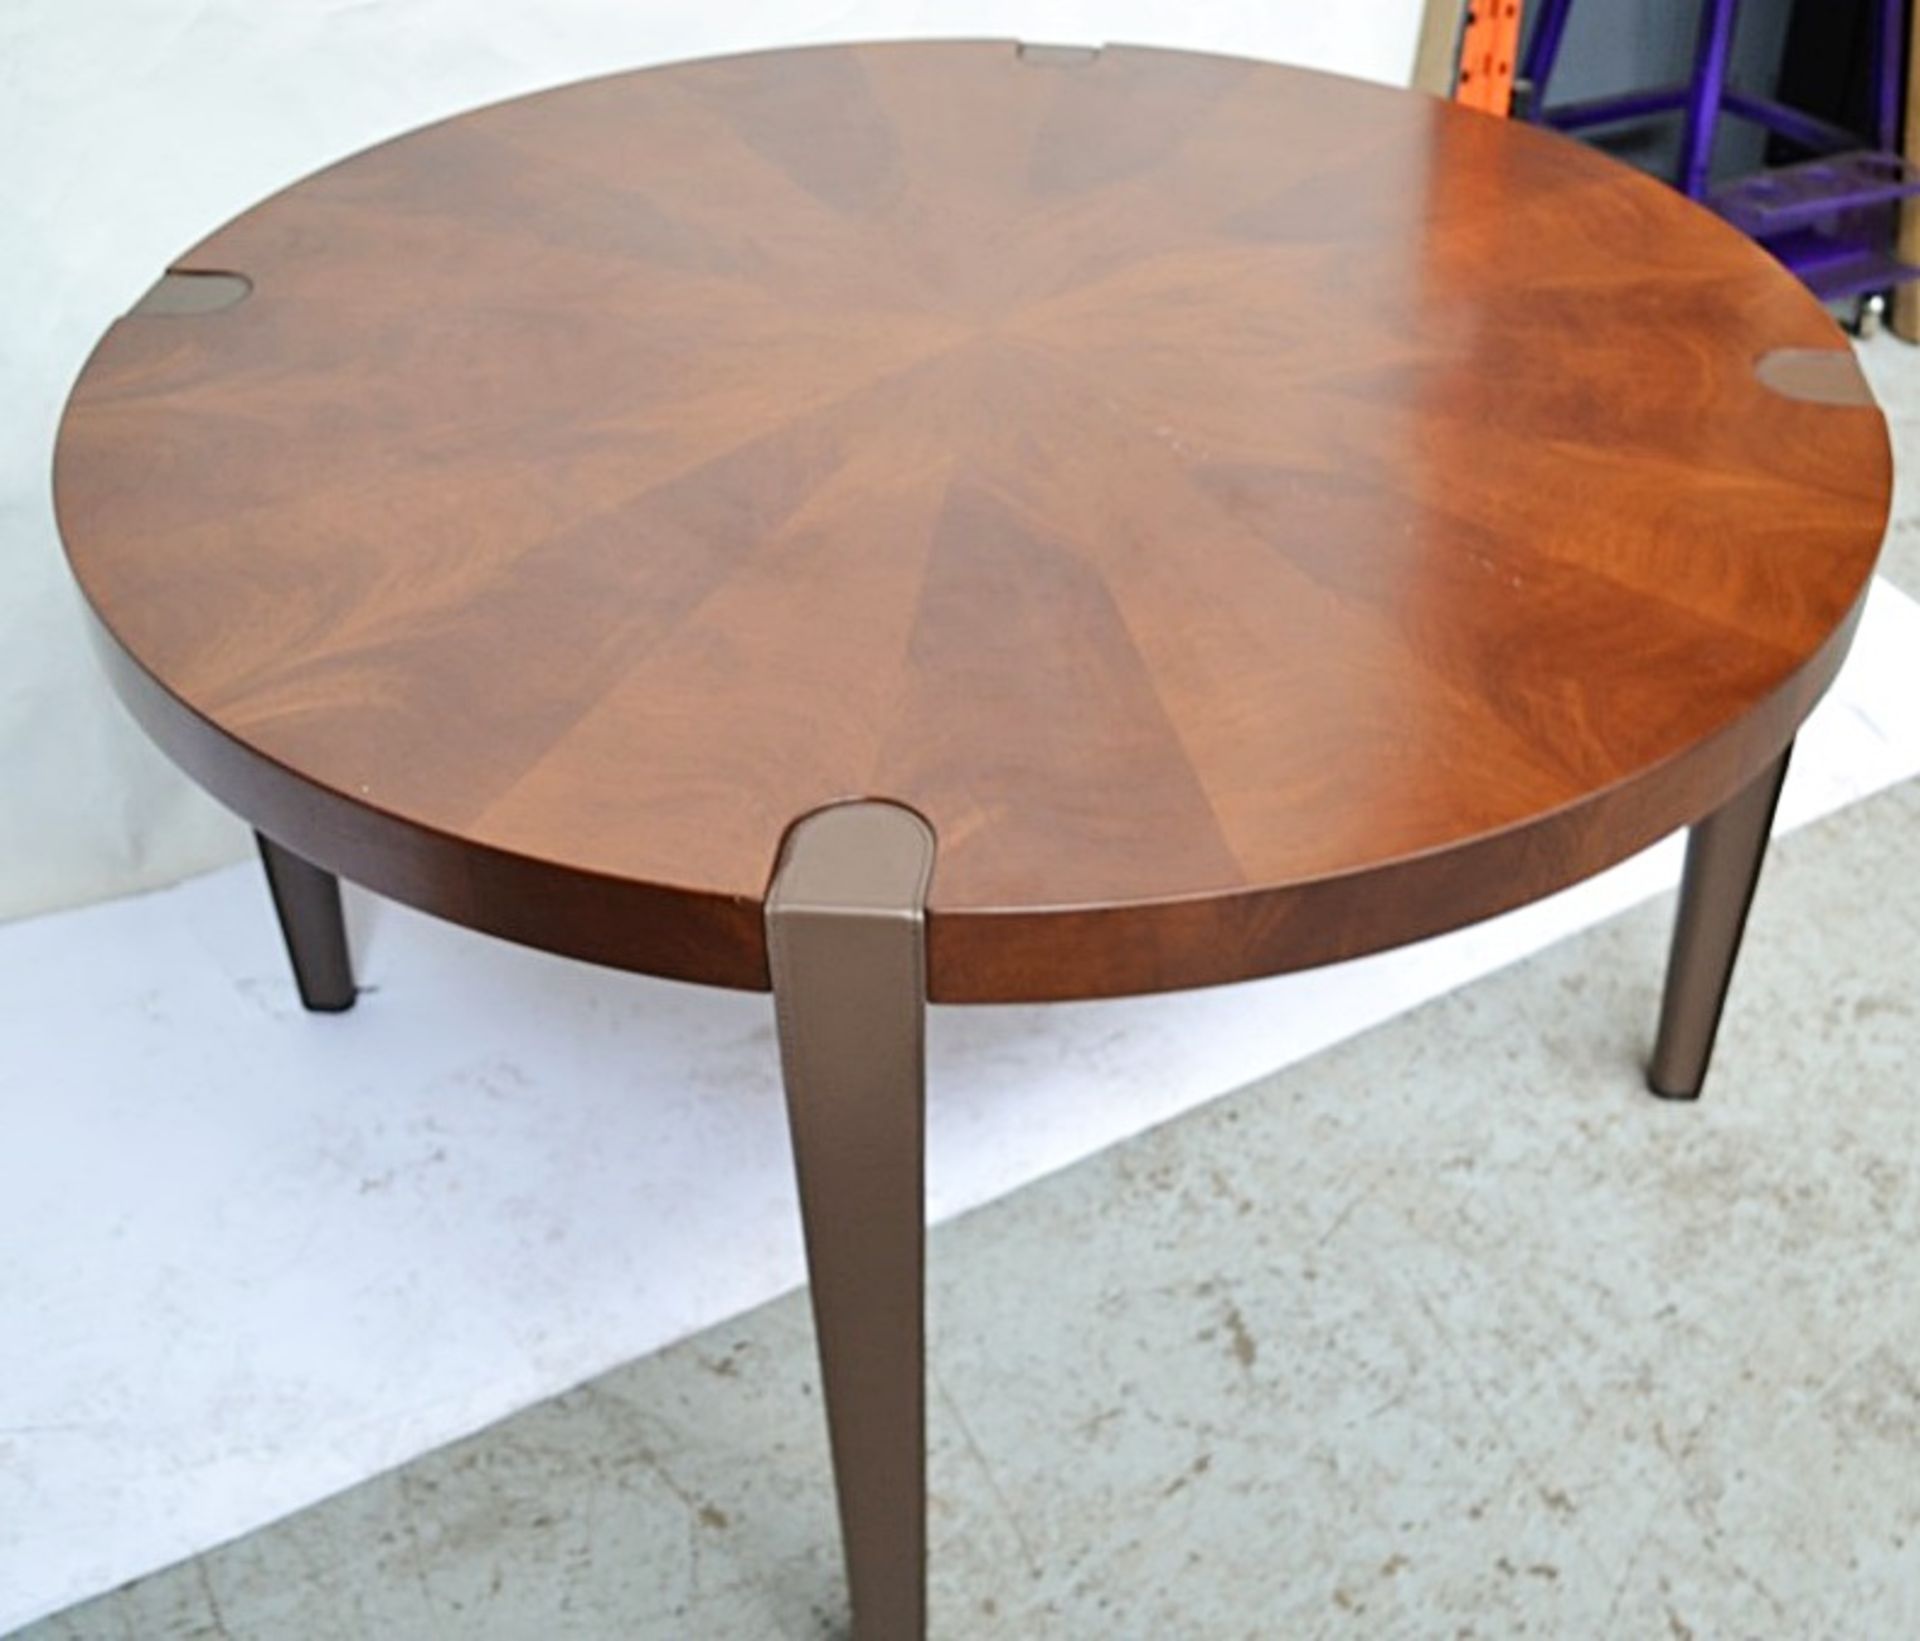 1 x GIORGETTI "Victor" Designer Wooden & Leather Coffee Table - Features A Dark Polished Cerejeira - Image 2 of 11